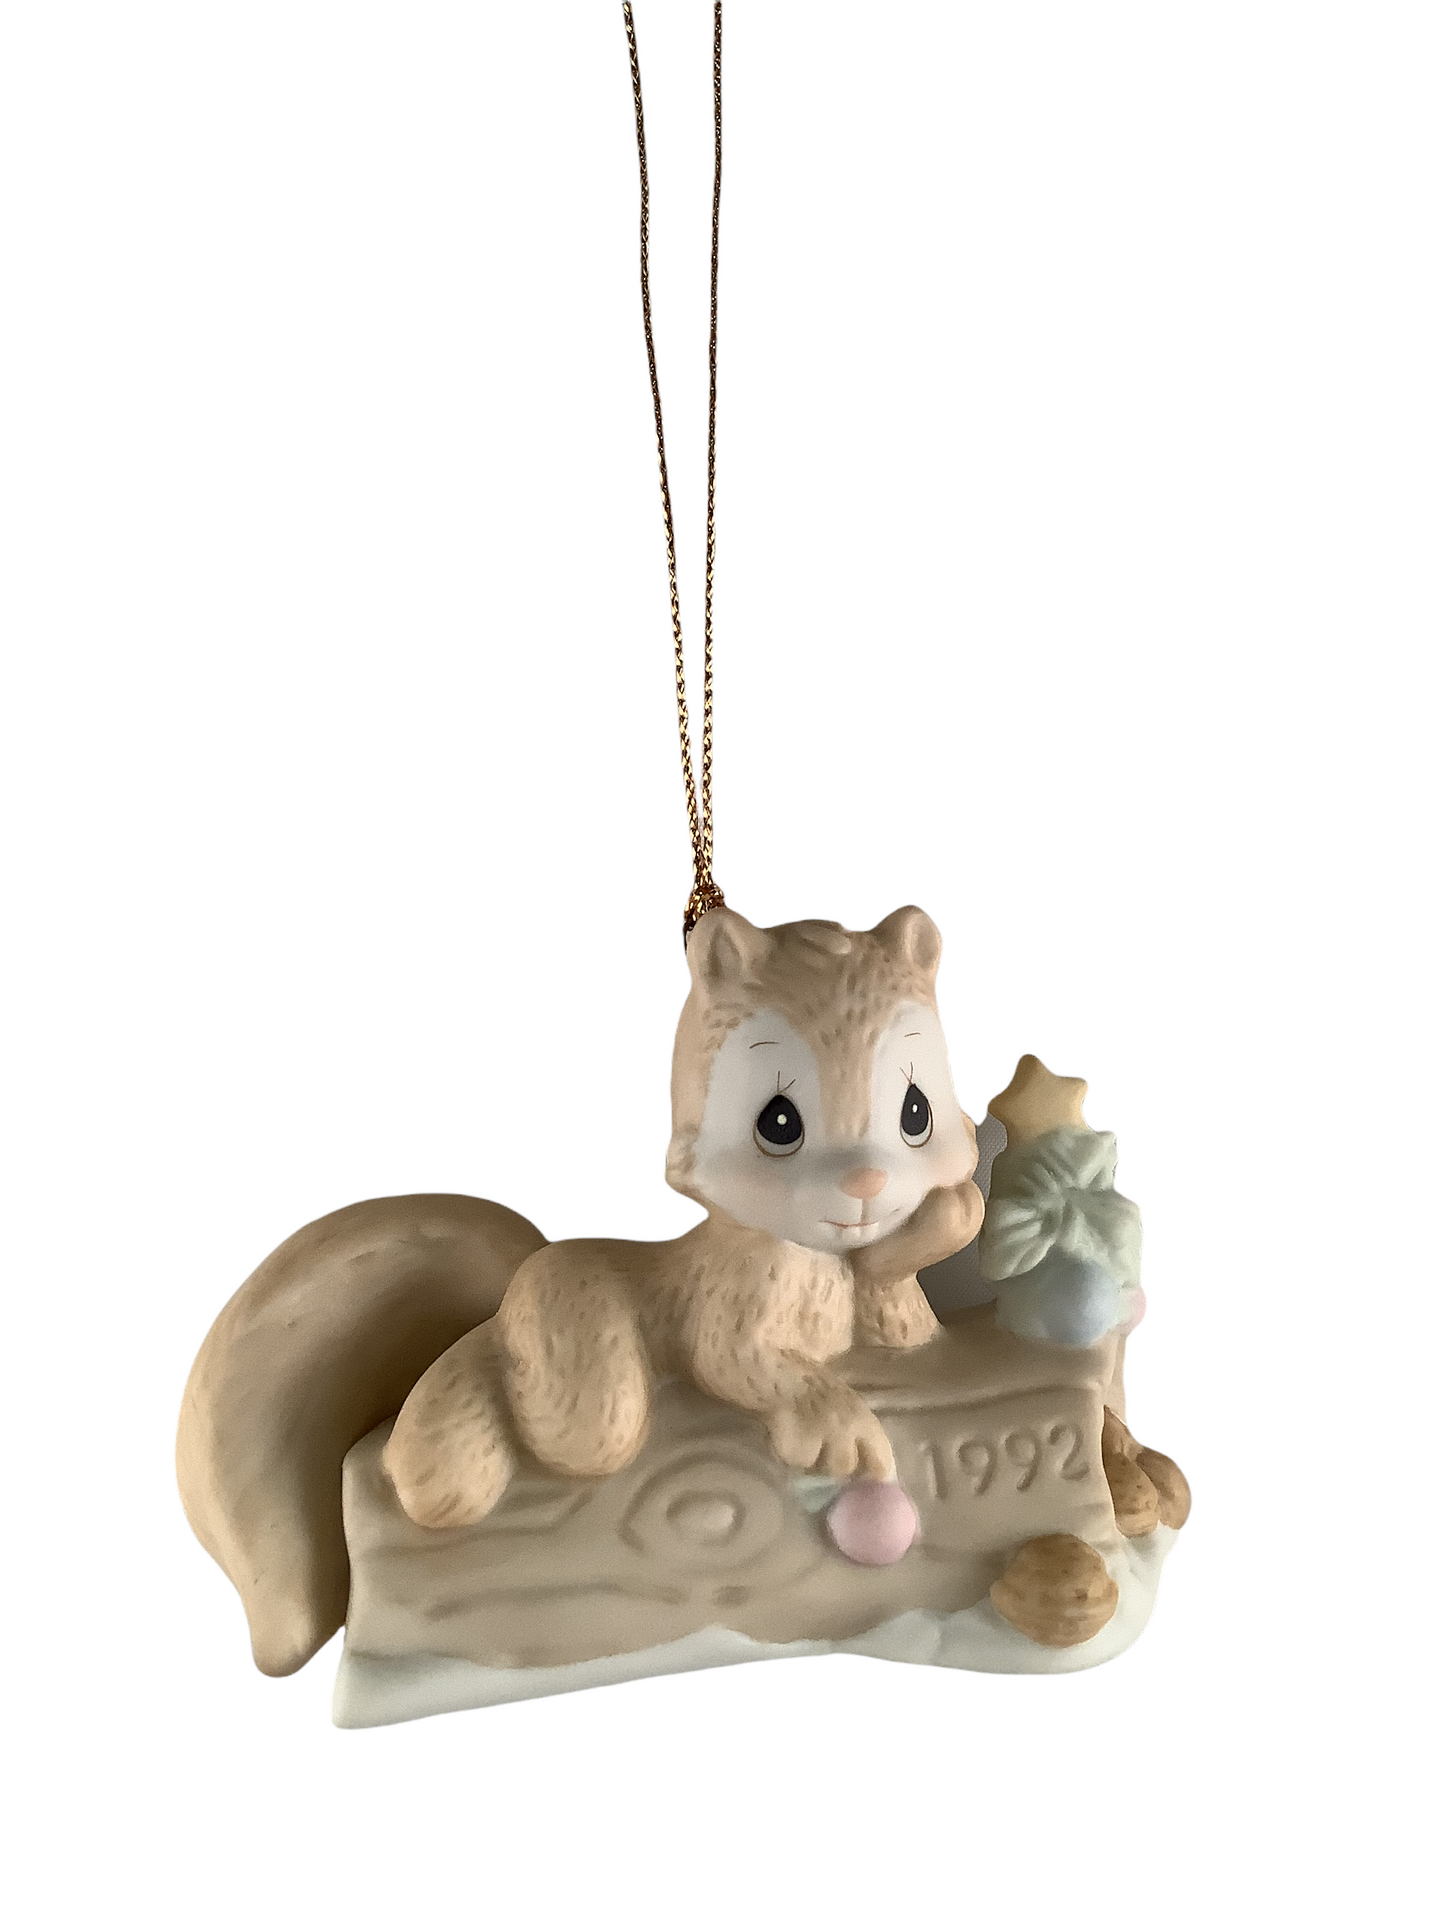 I'm Nuts About You - 1992 Dated Annual Precious Moment Ornament